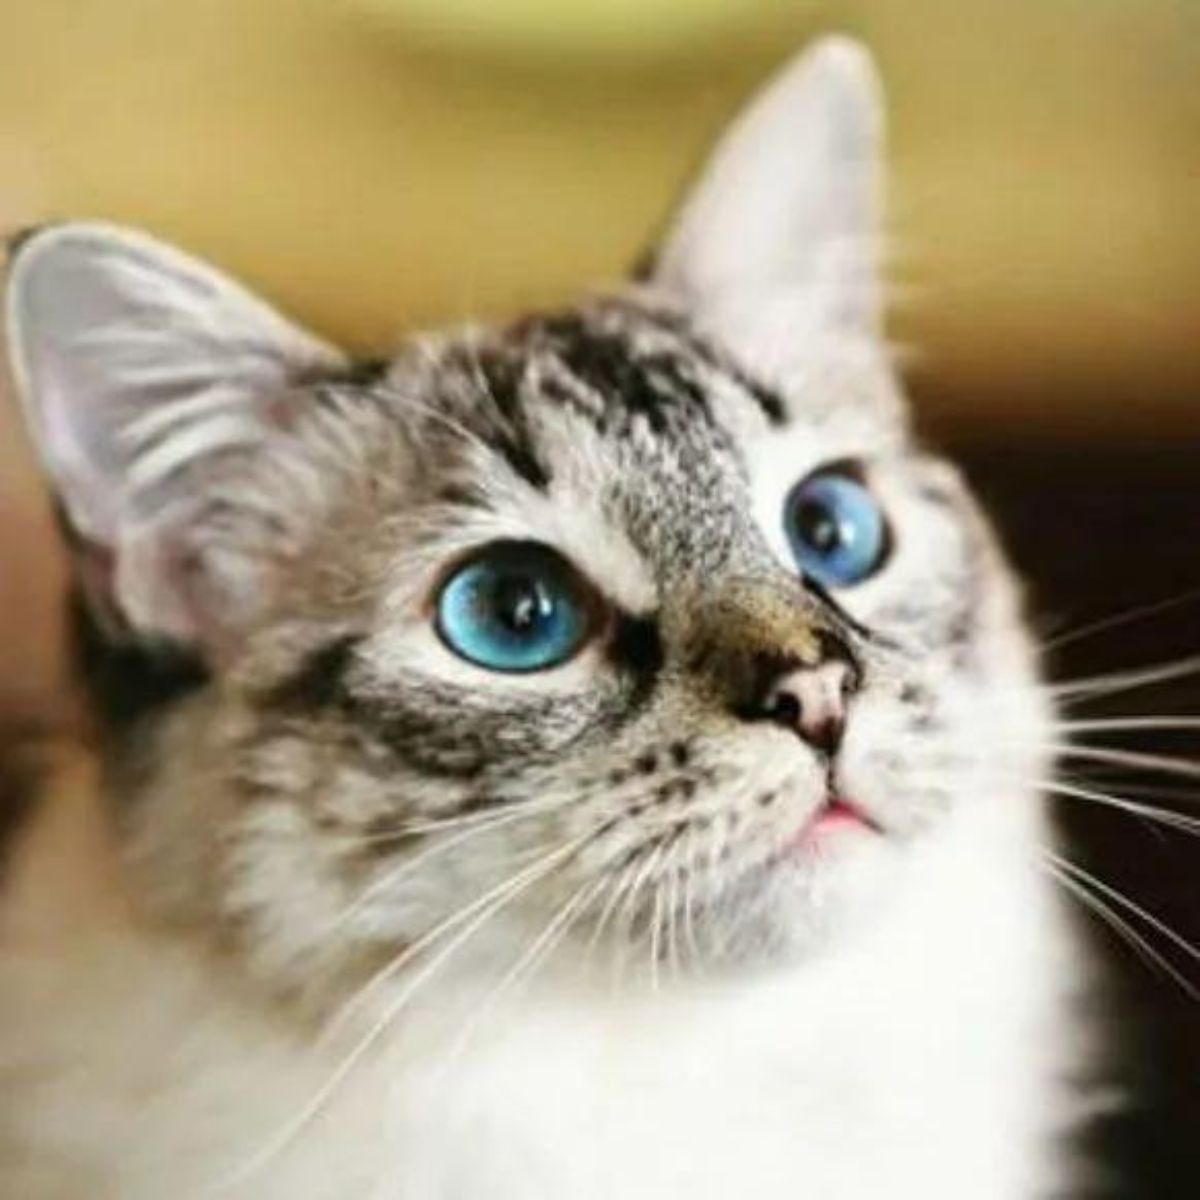 close-up photo of cat with blue eyes